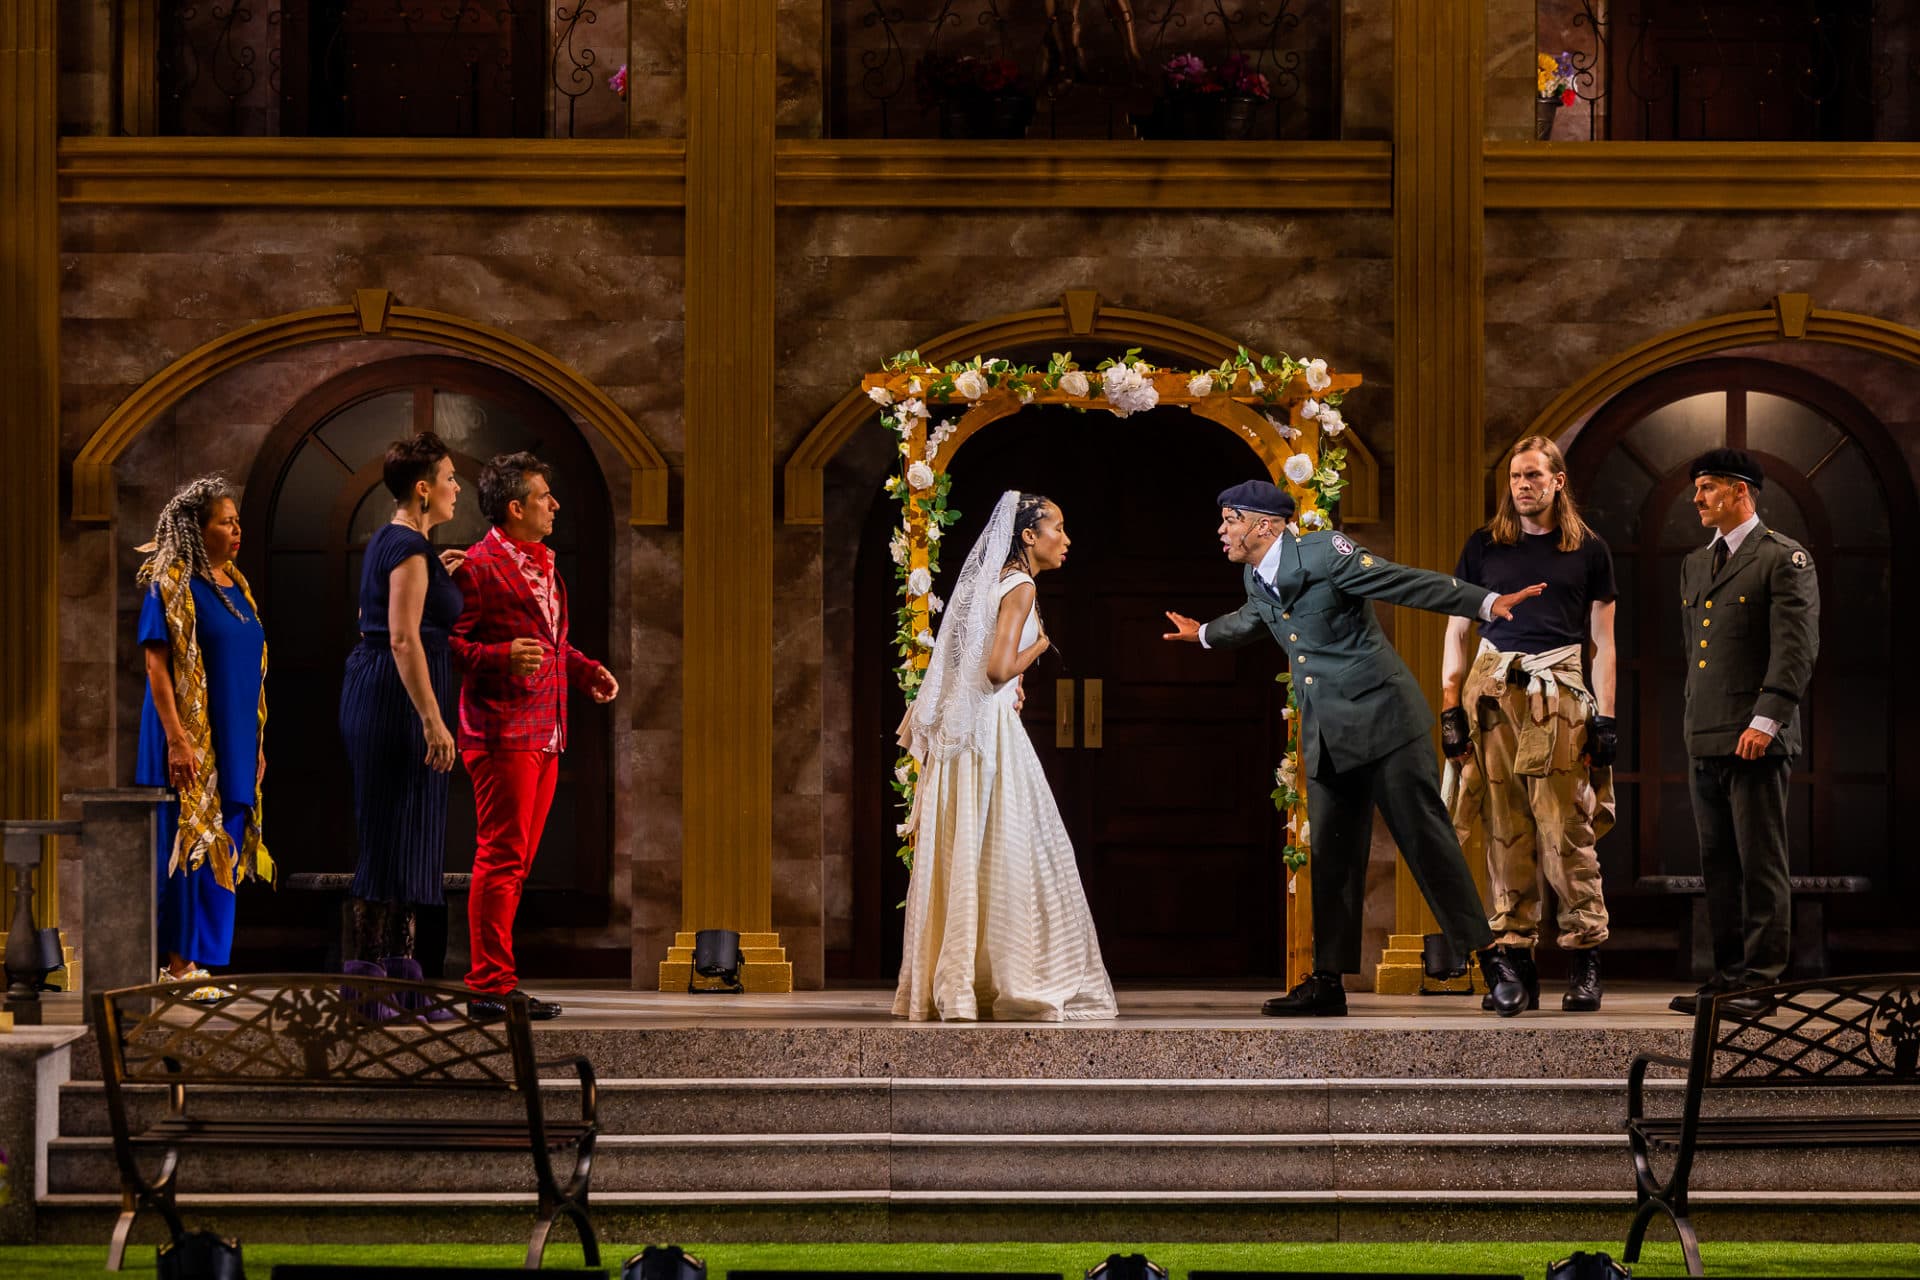 Hero (Rebecca-Anne Whitaker) is shamed by her love, Claudio (Erik Robles) on their wedding day during a performance of Commonwealth Shakespeare Company's &quot;Much Ado About Nothing.&quot; (Courtesy Nile Scott Studios)